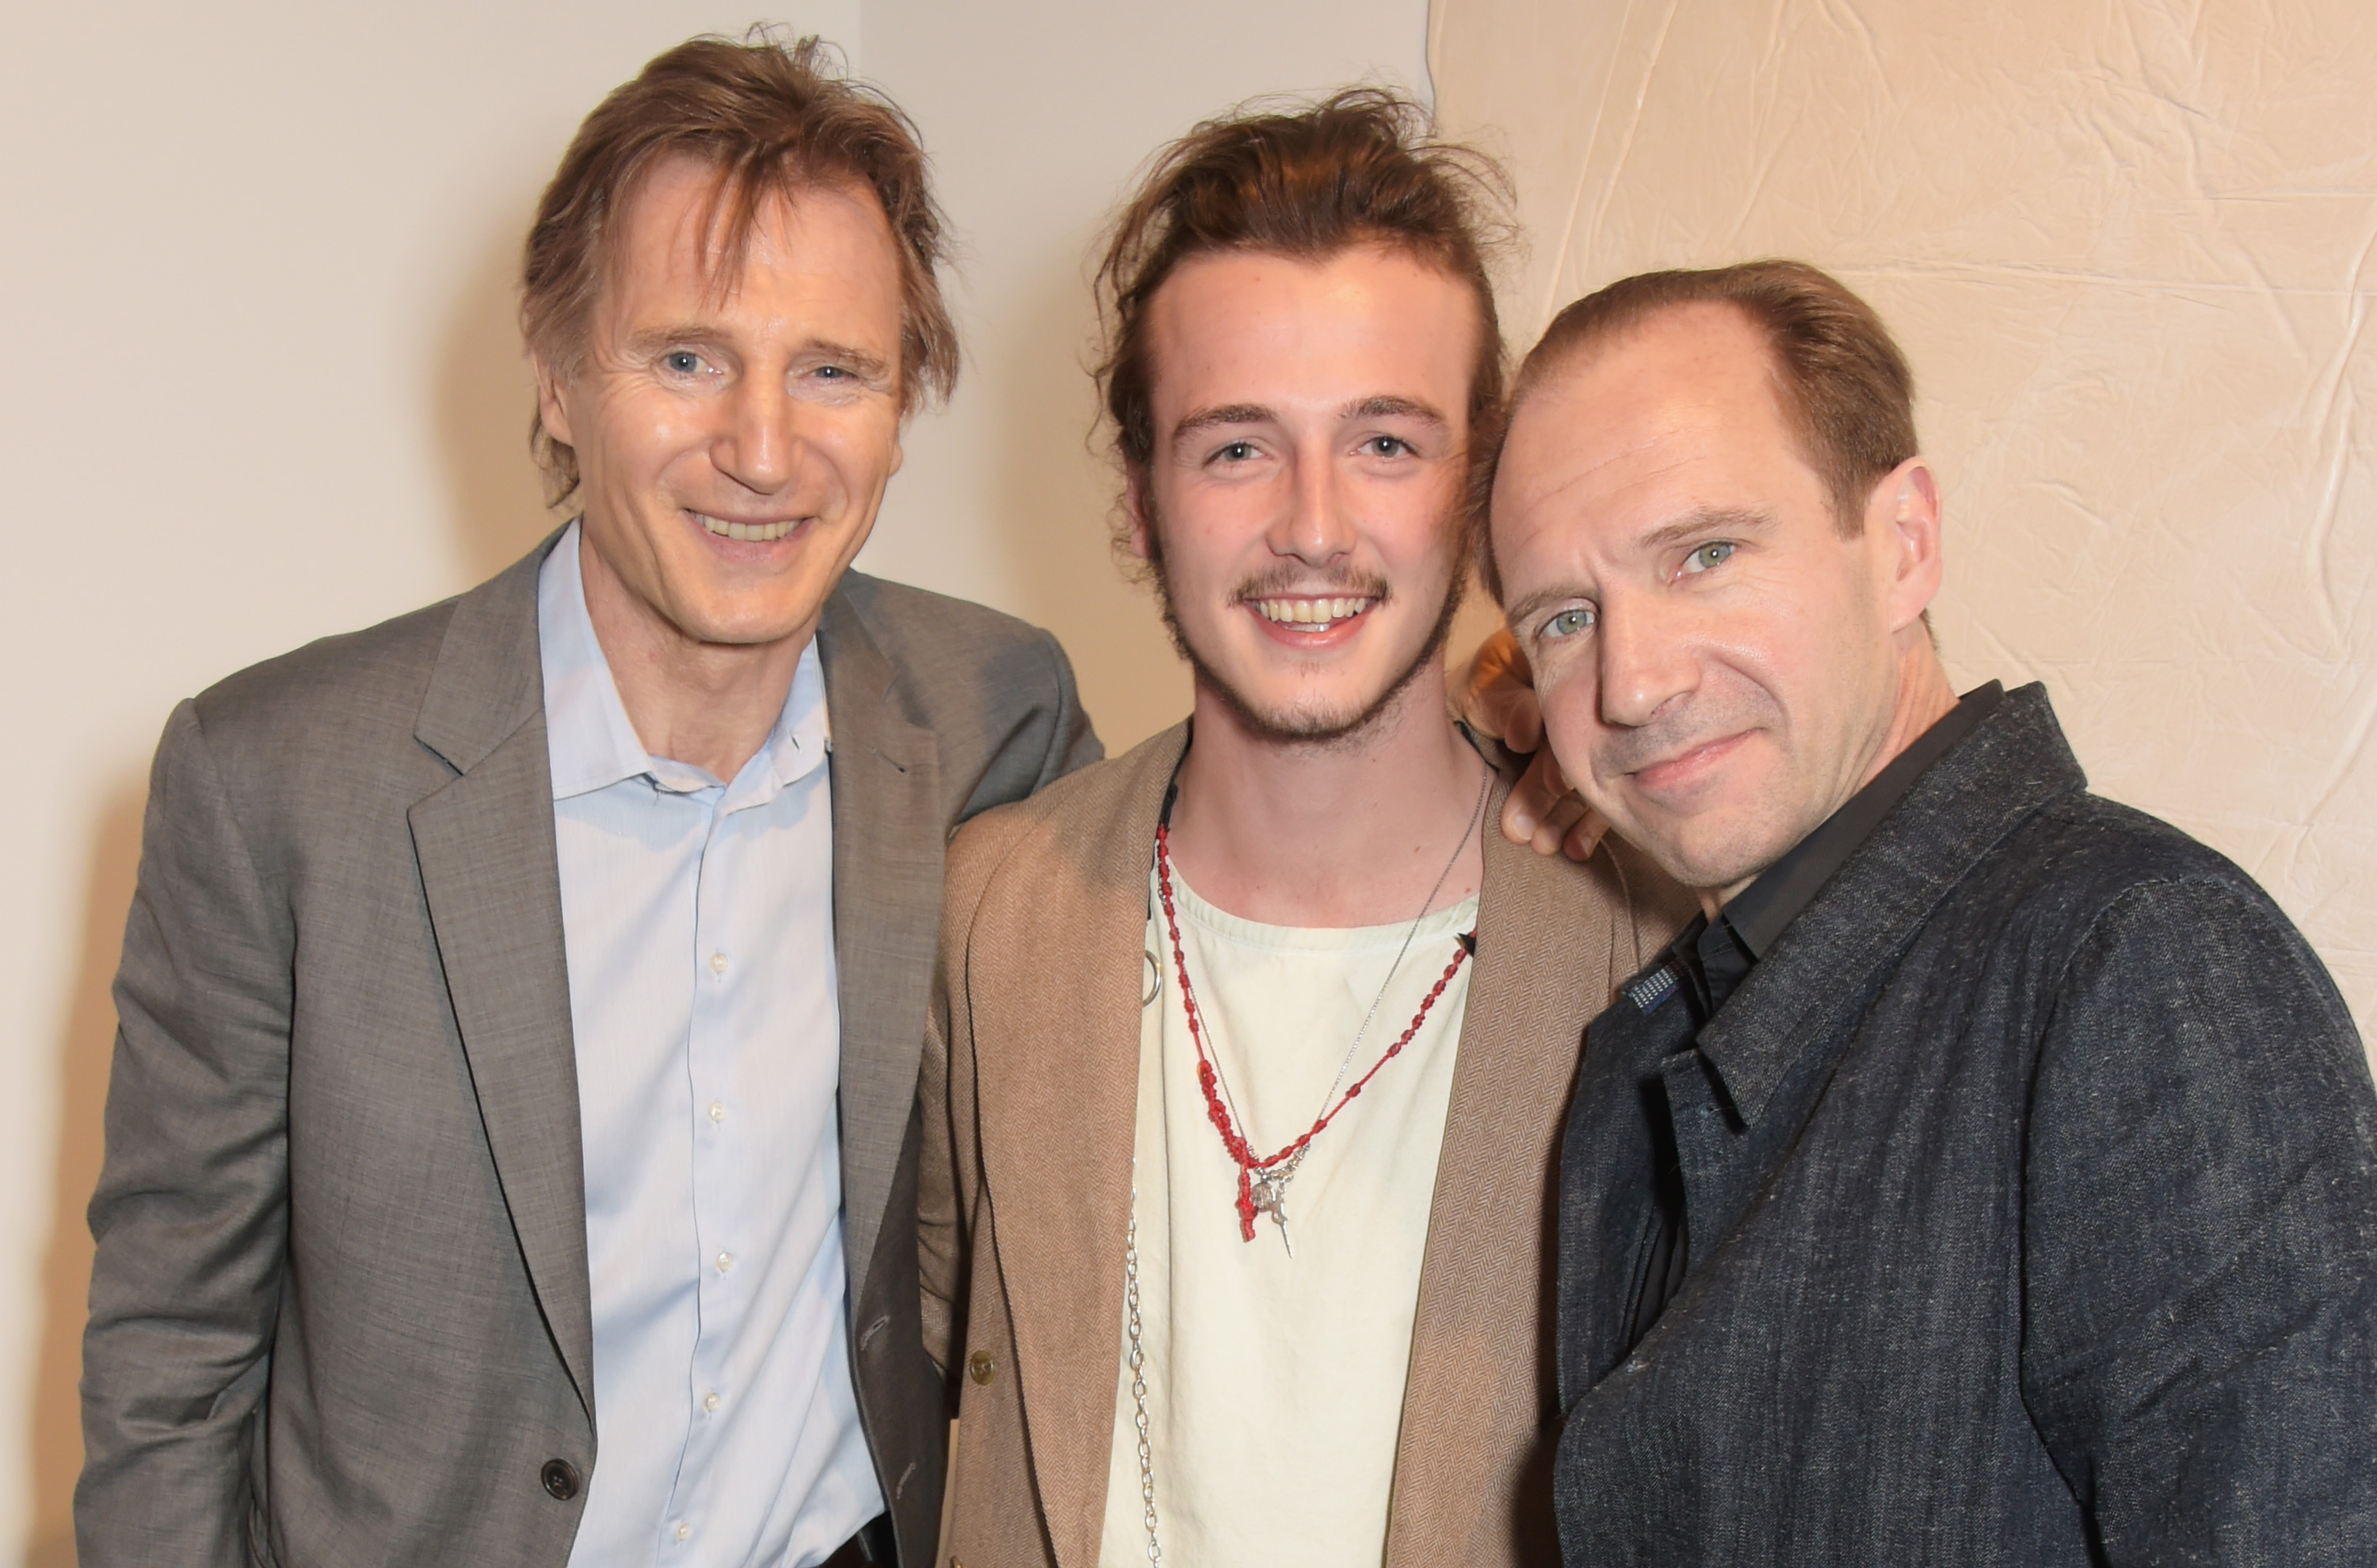 Liam Neeson, Micheal Neeson, and Ralph Fiennes on June 2, 2015 in London, England | Source: Getty Images